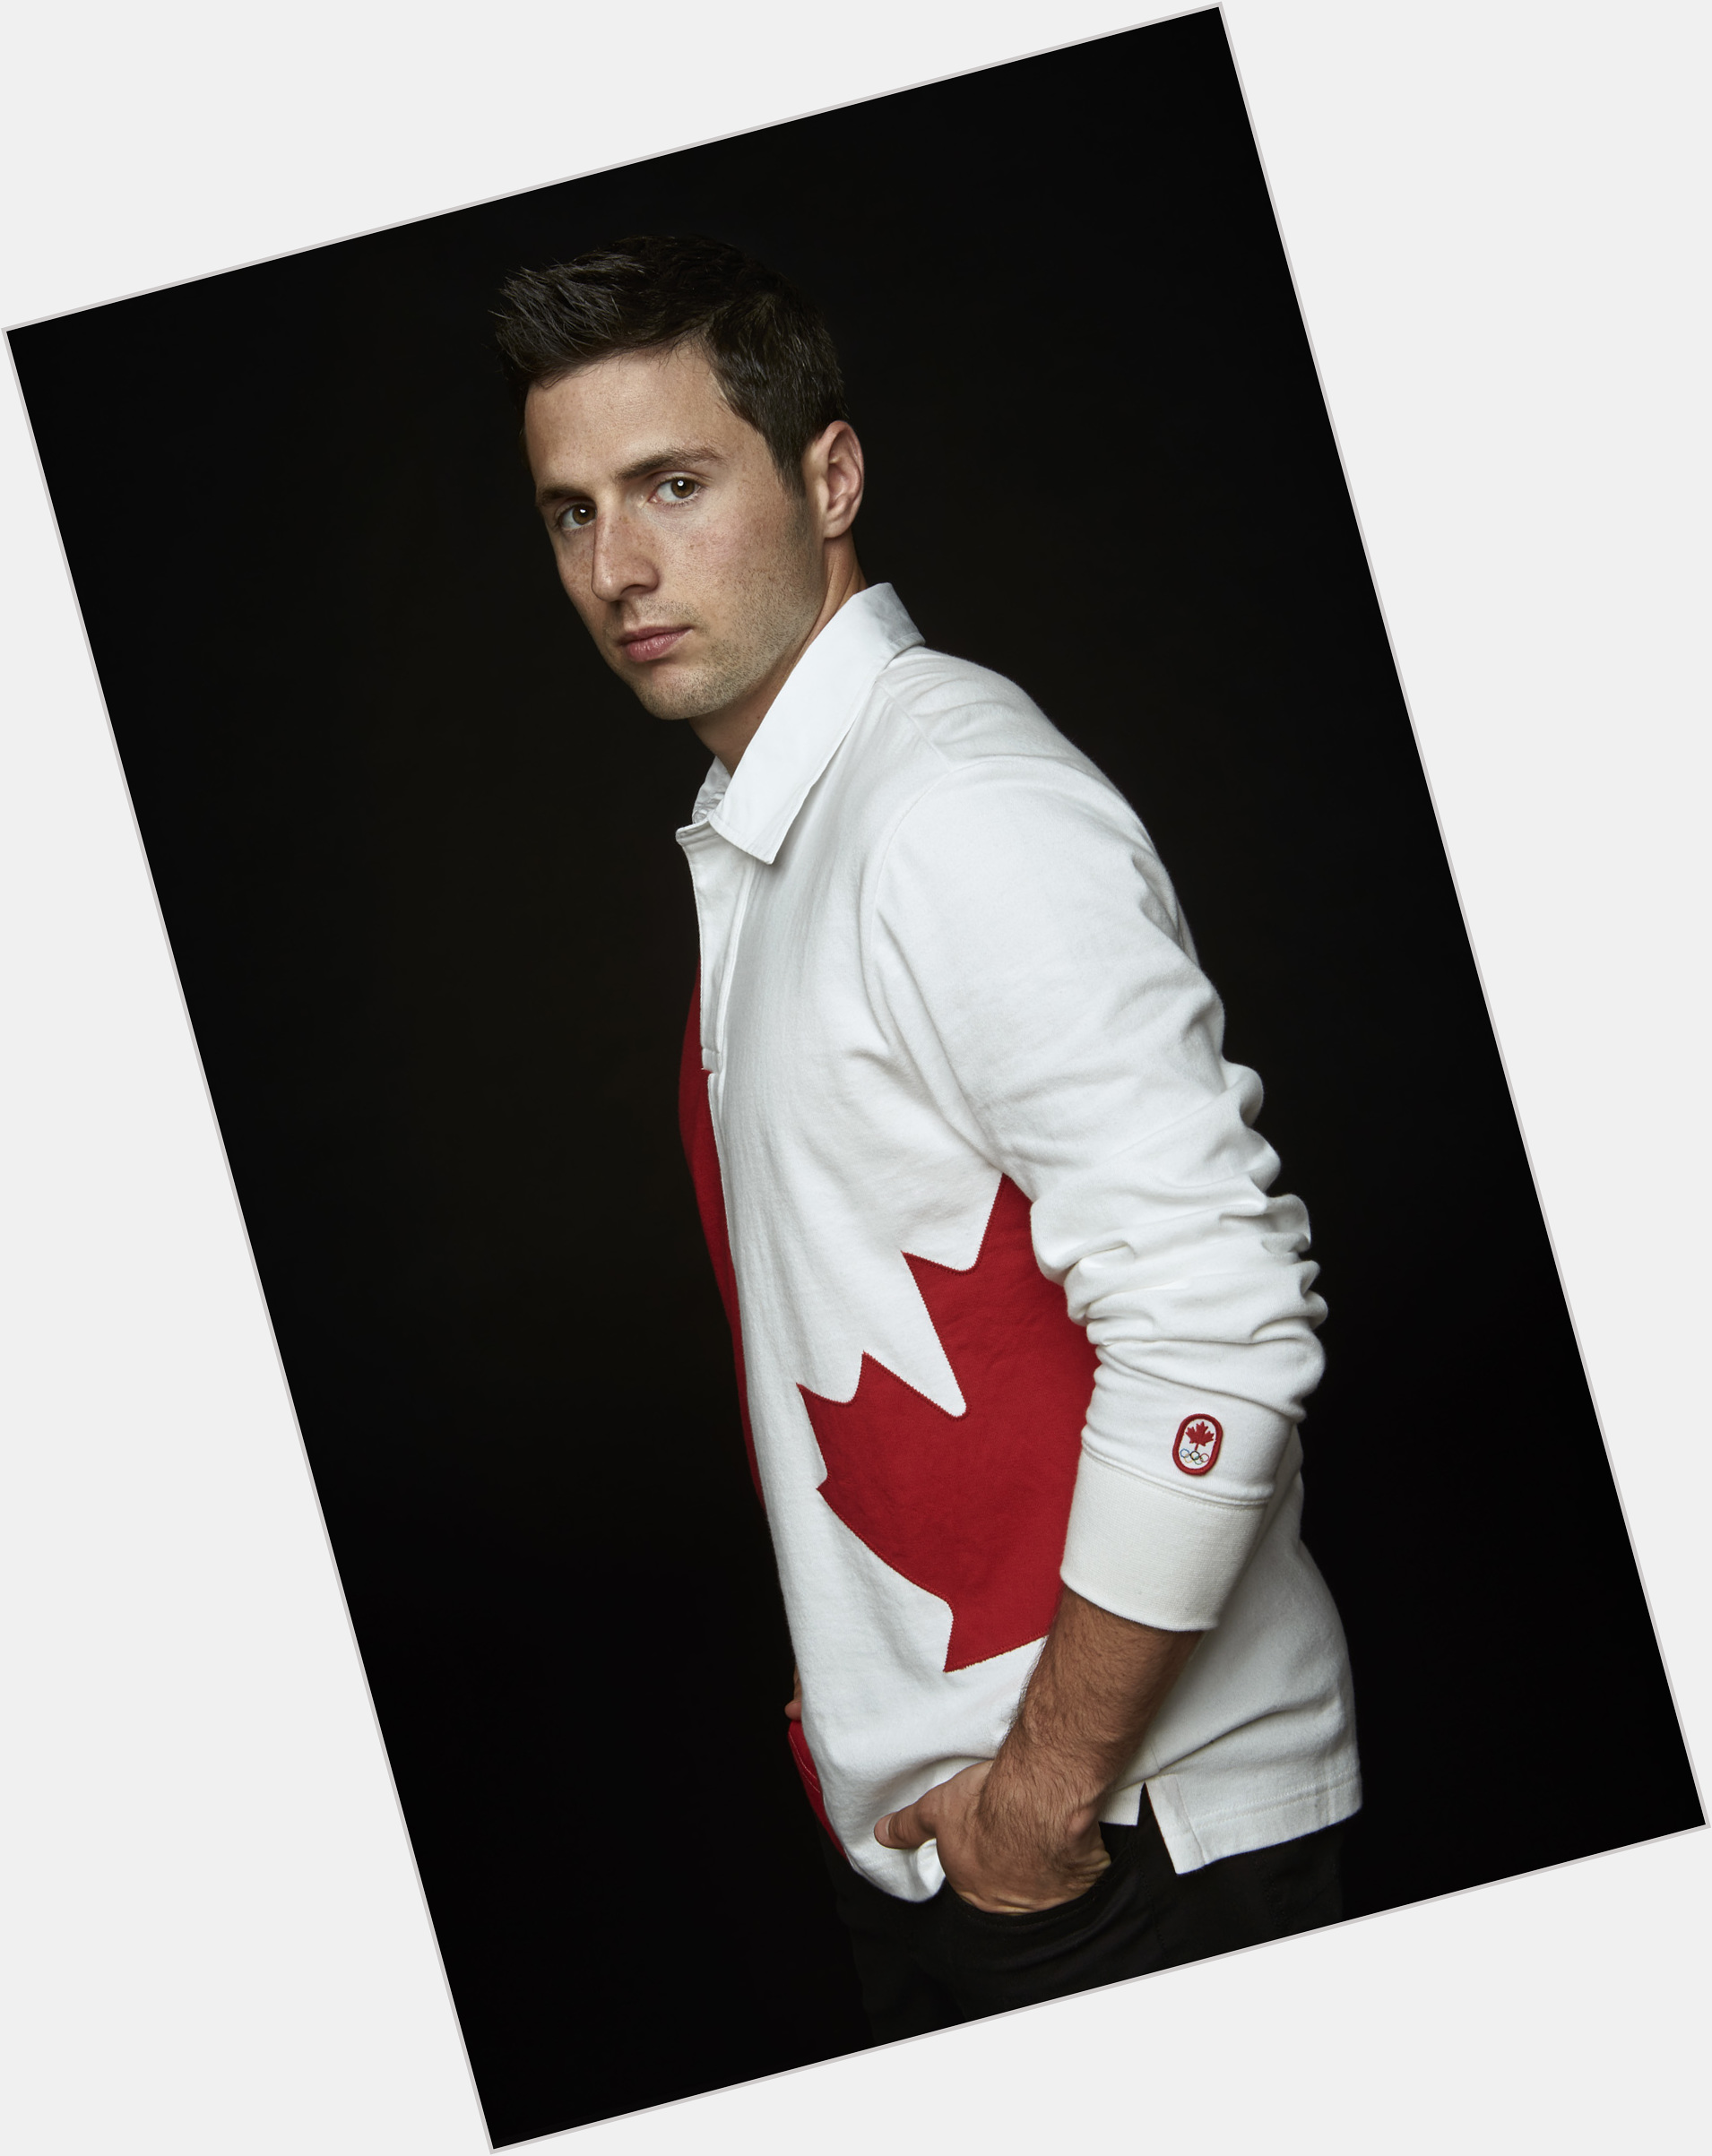 Alexandre Bilodeau Athletic body,  light brown hair & hairstyles